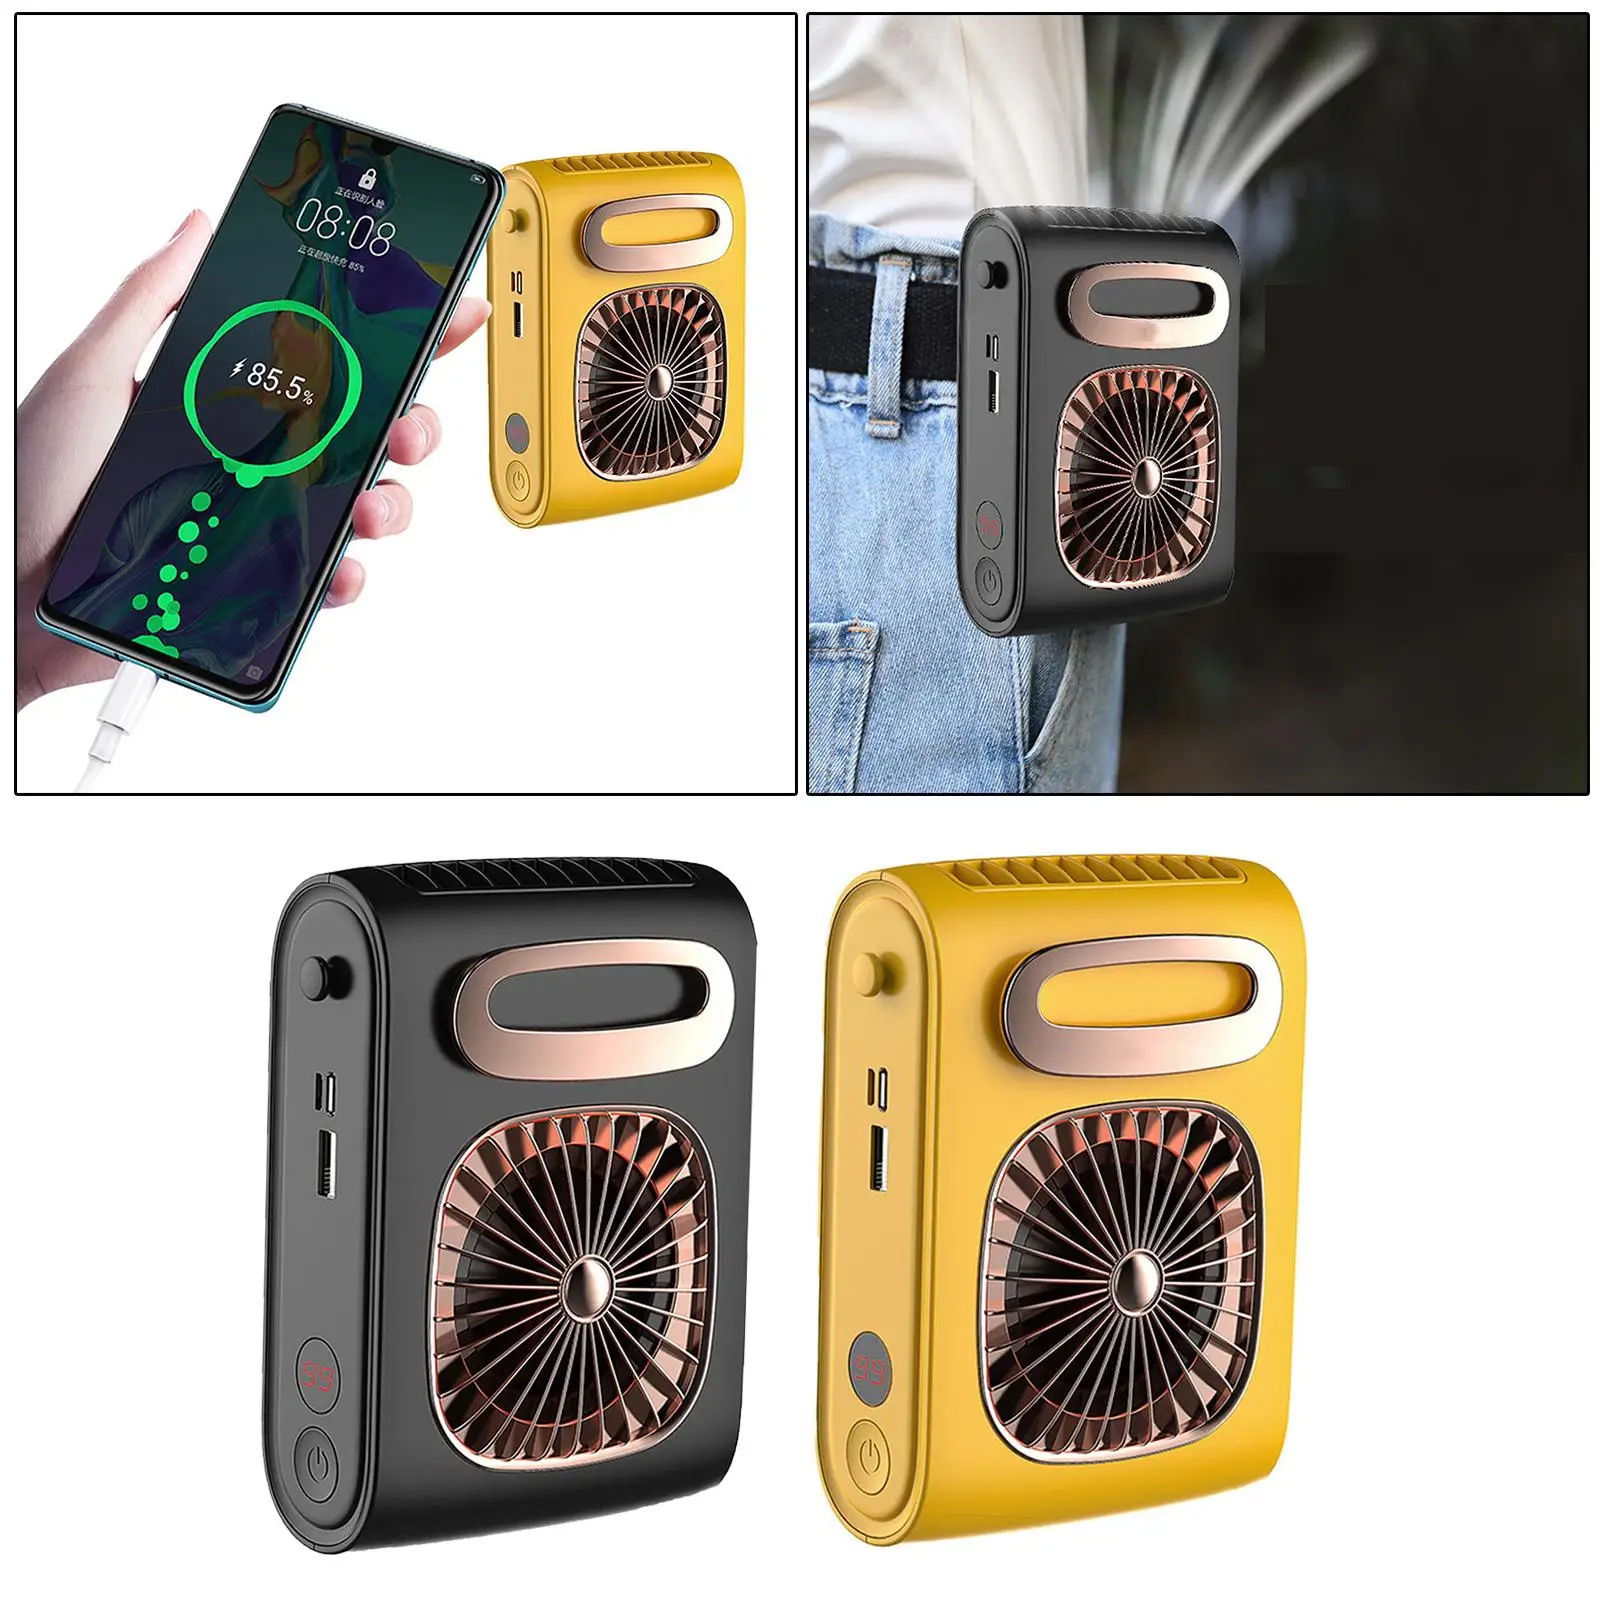 Portable Waist Clip Fan 3 Speeds for T-shirts Traveling Working Outdoor